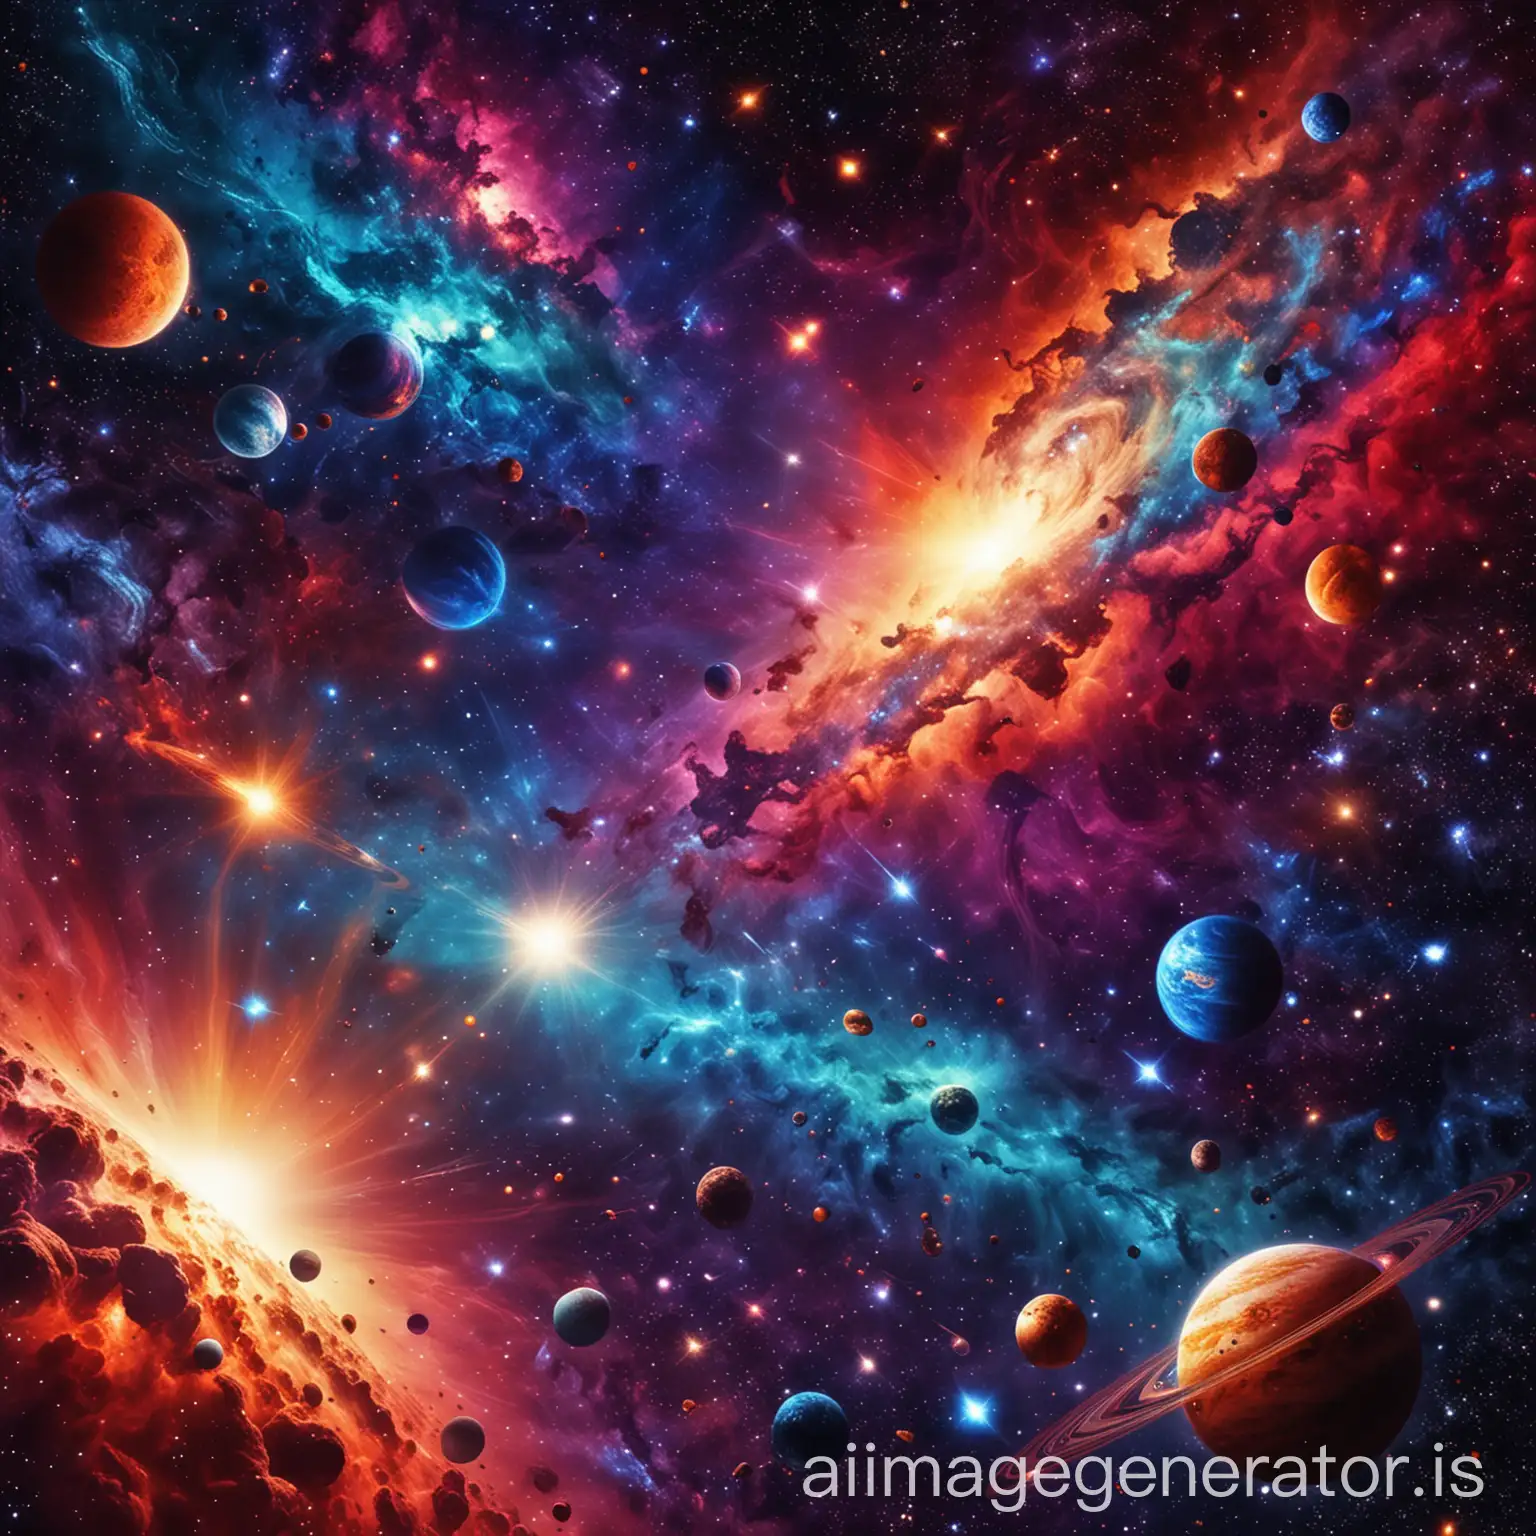 A vibrant galaxy background with stars and planets scattered across.